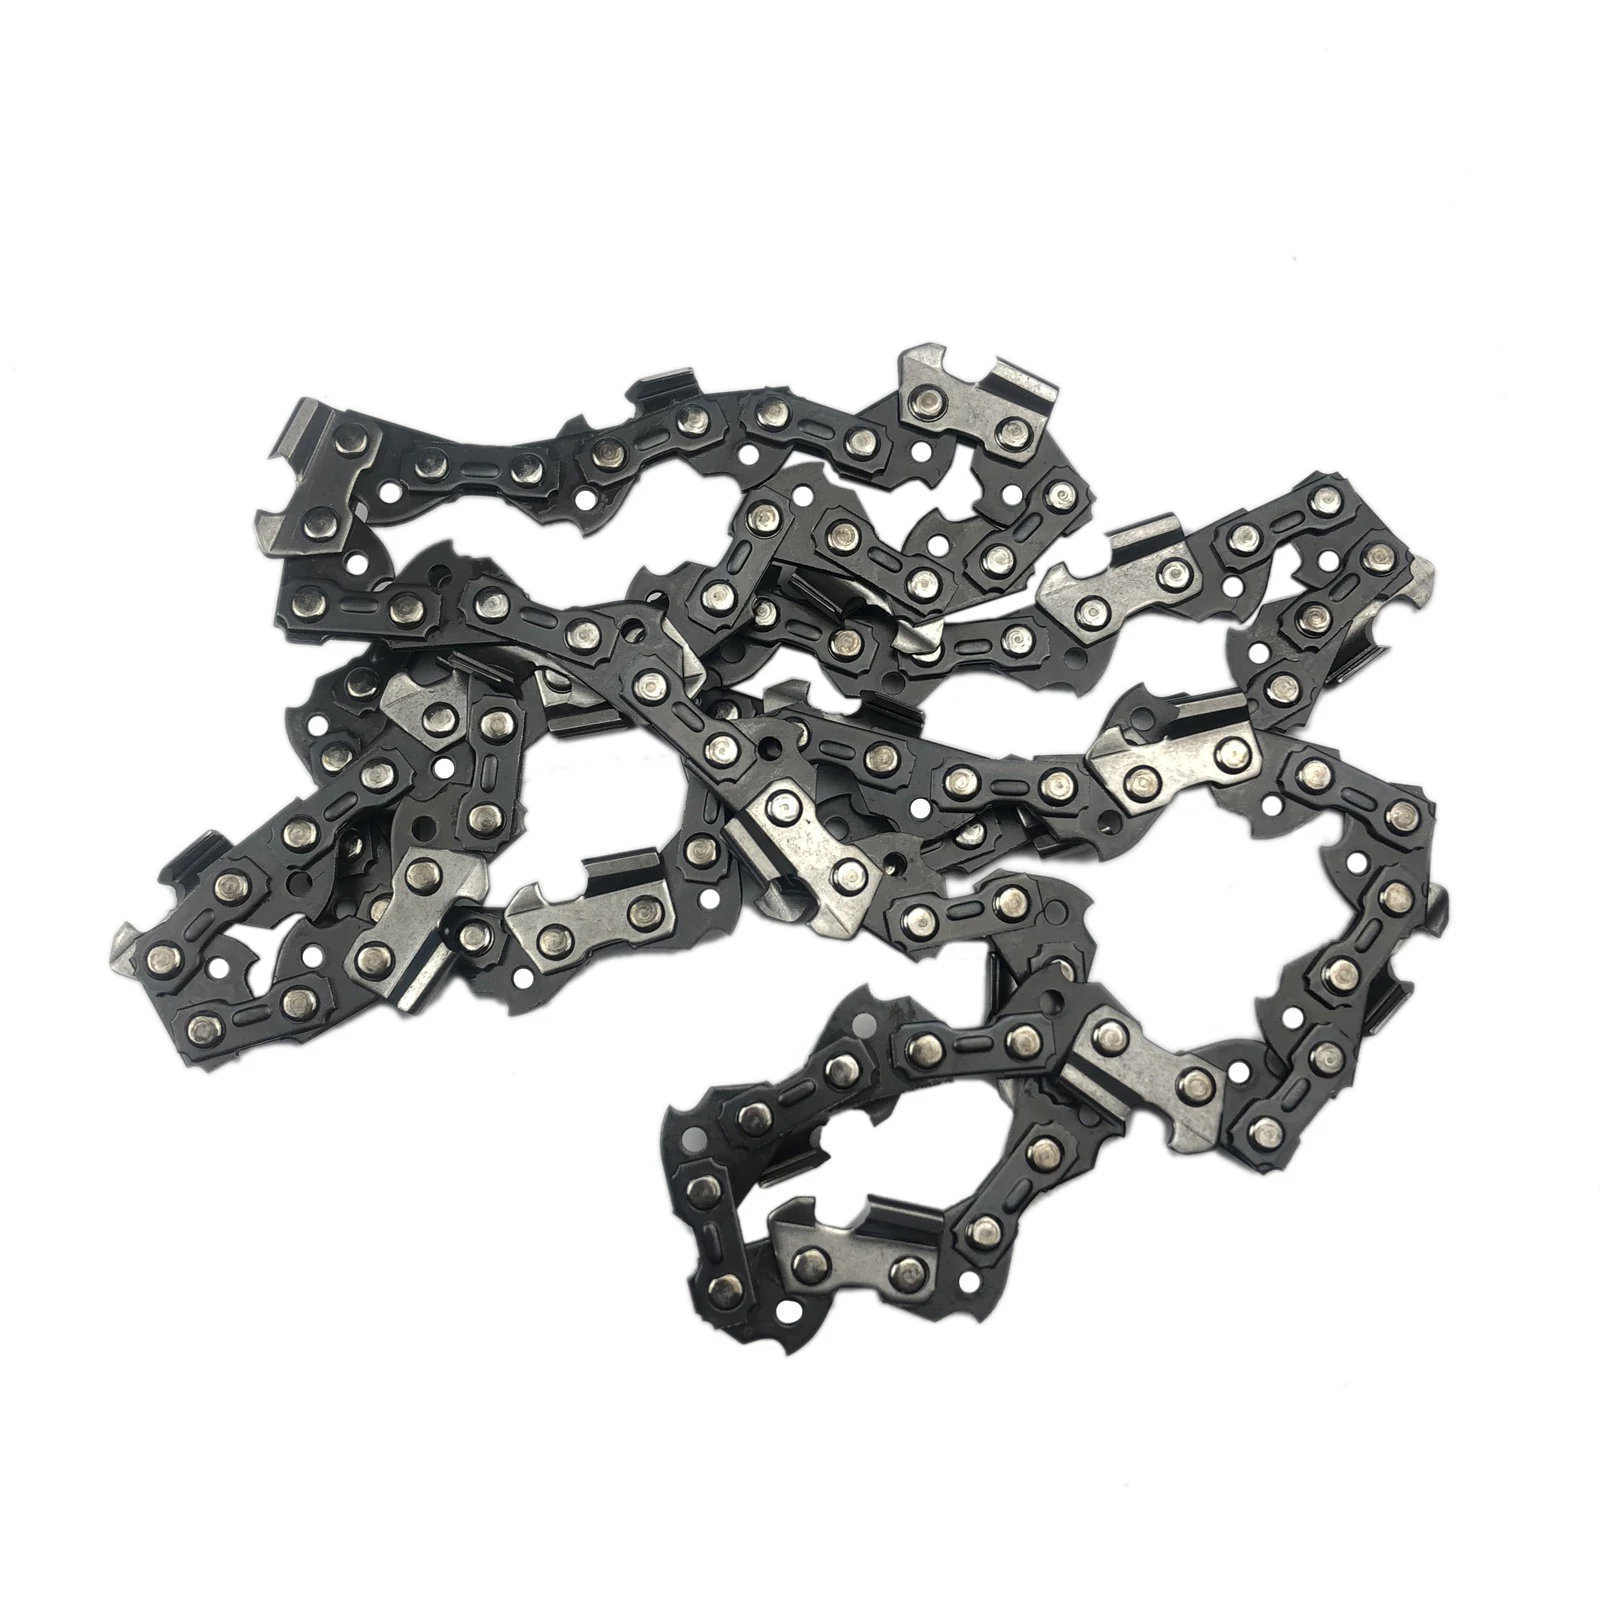 

14" Chainsaw Chain 3/8 LP 50DL Sections fit for STIHL MS250 MS180 MS230 MS170 MS190 Replace Tool Steel Saw Chain Garden Tool